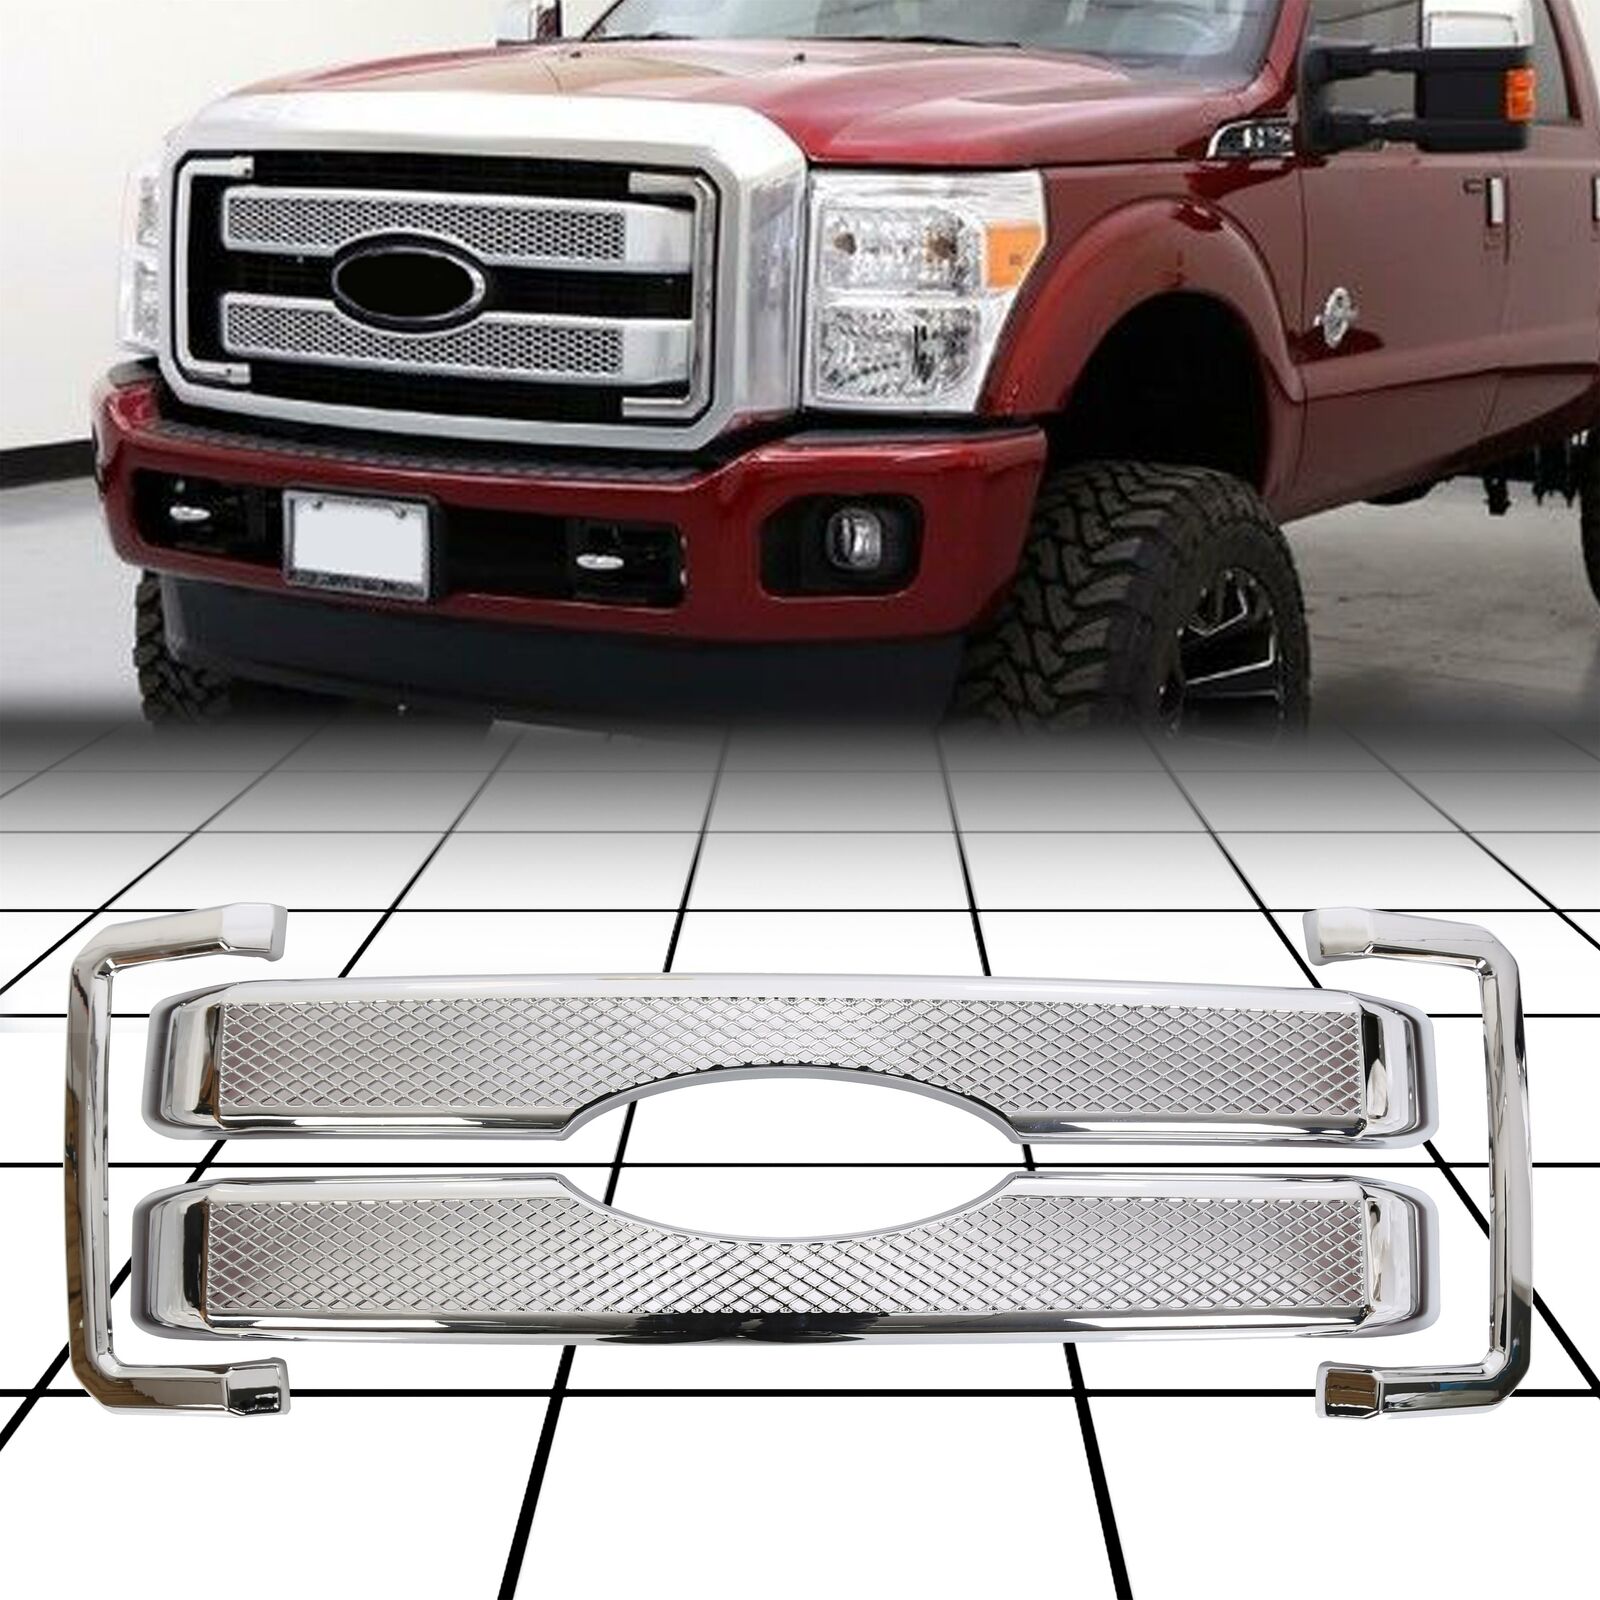 Fit 2011-16 Ford F-250 F-350 F-450 F-550 Chrome Bumper Hood Grille Cover Frame